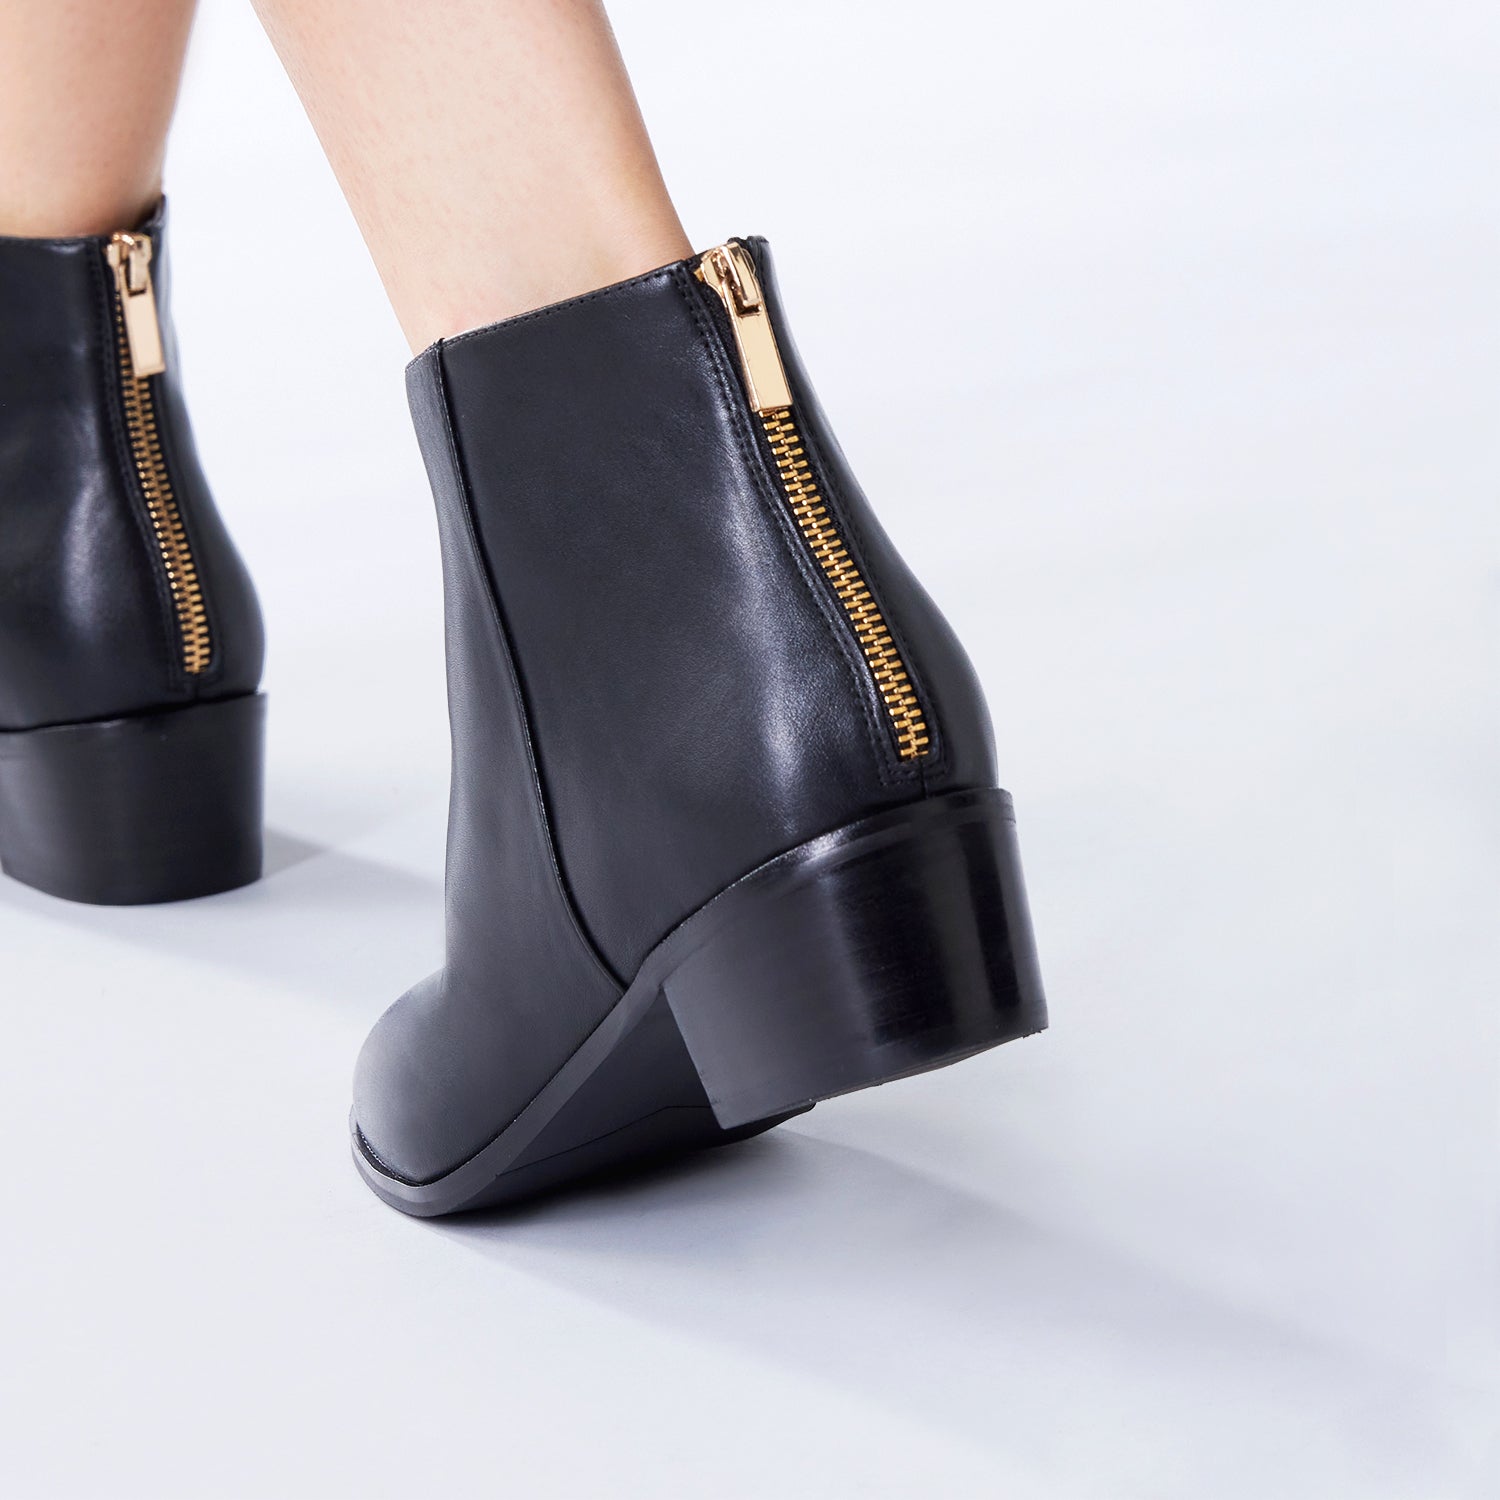 Layla Ankle Boot 40mm | Black Leather